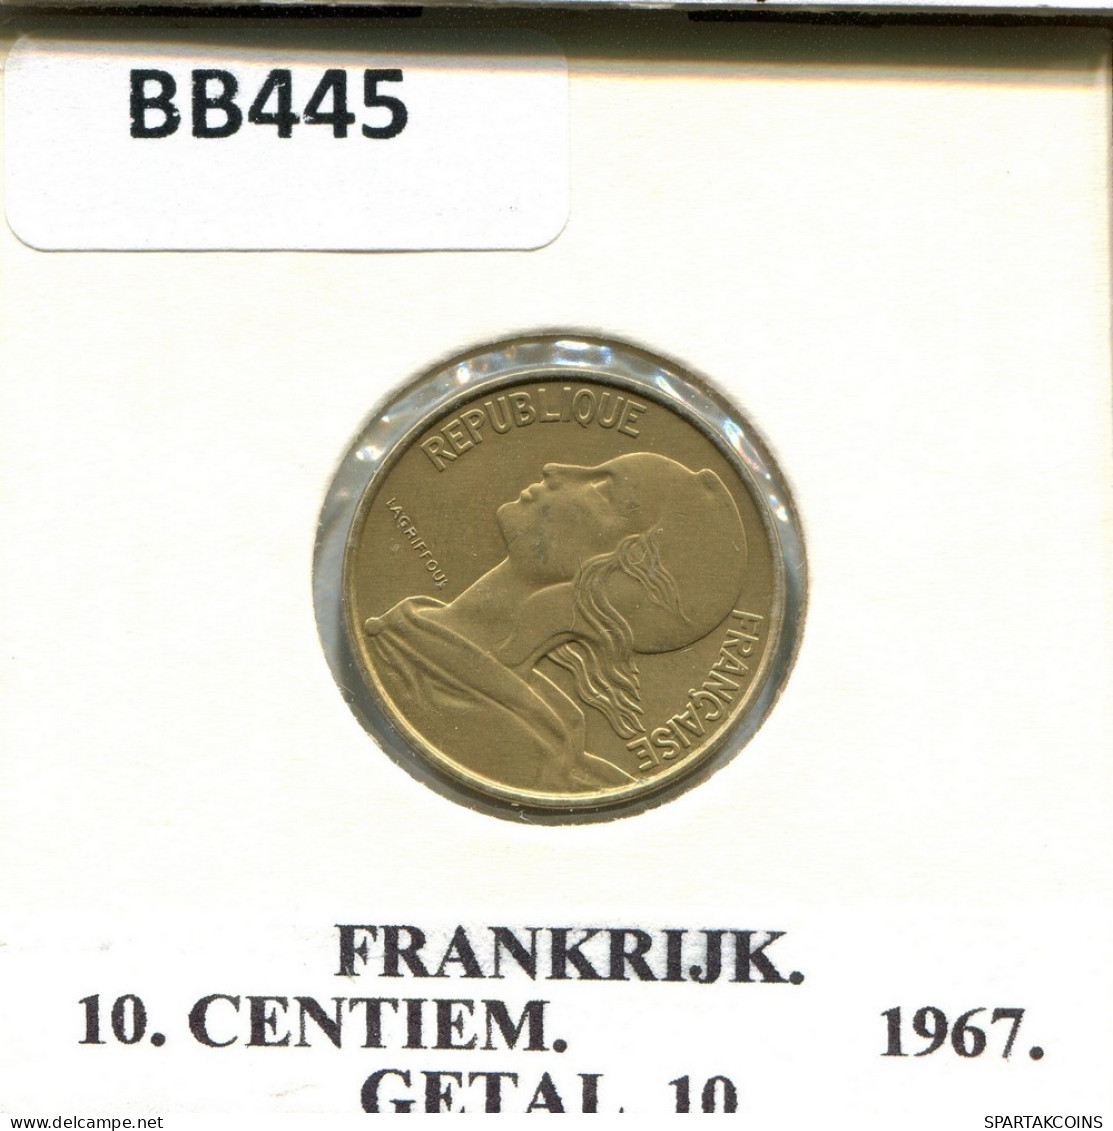 10 CENTIMES 1967 FRANCE Coin #BB445.U.A - 10 Centimes